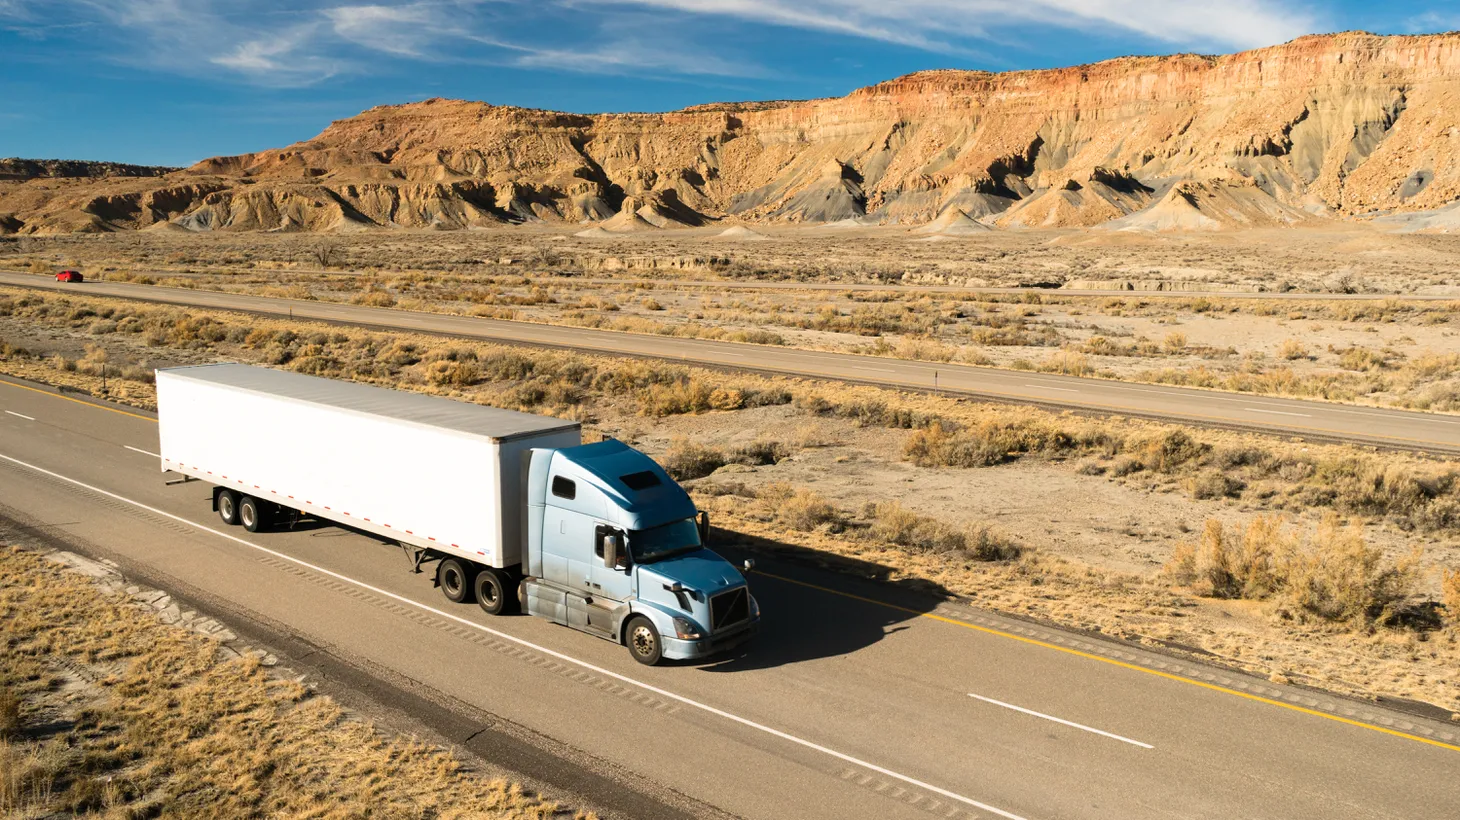 To keep the supply chain moving, some truck drivers are living full-time in their big rigs, which means cooking in there too.